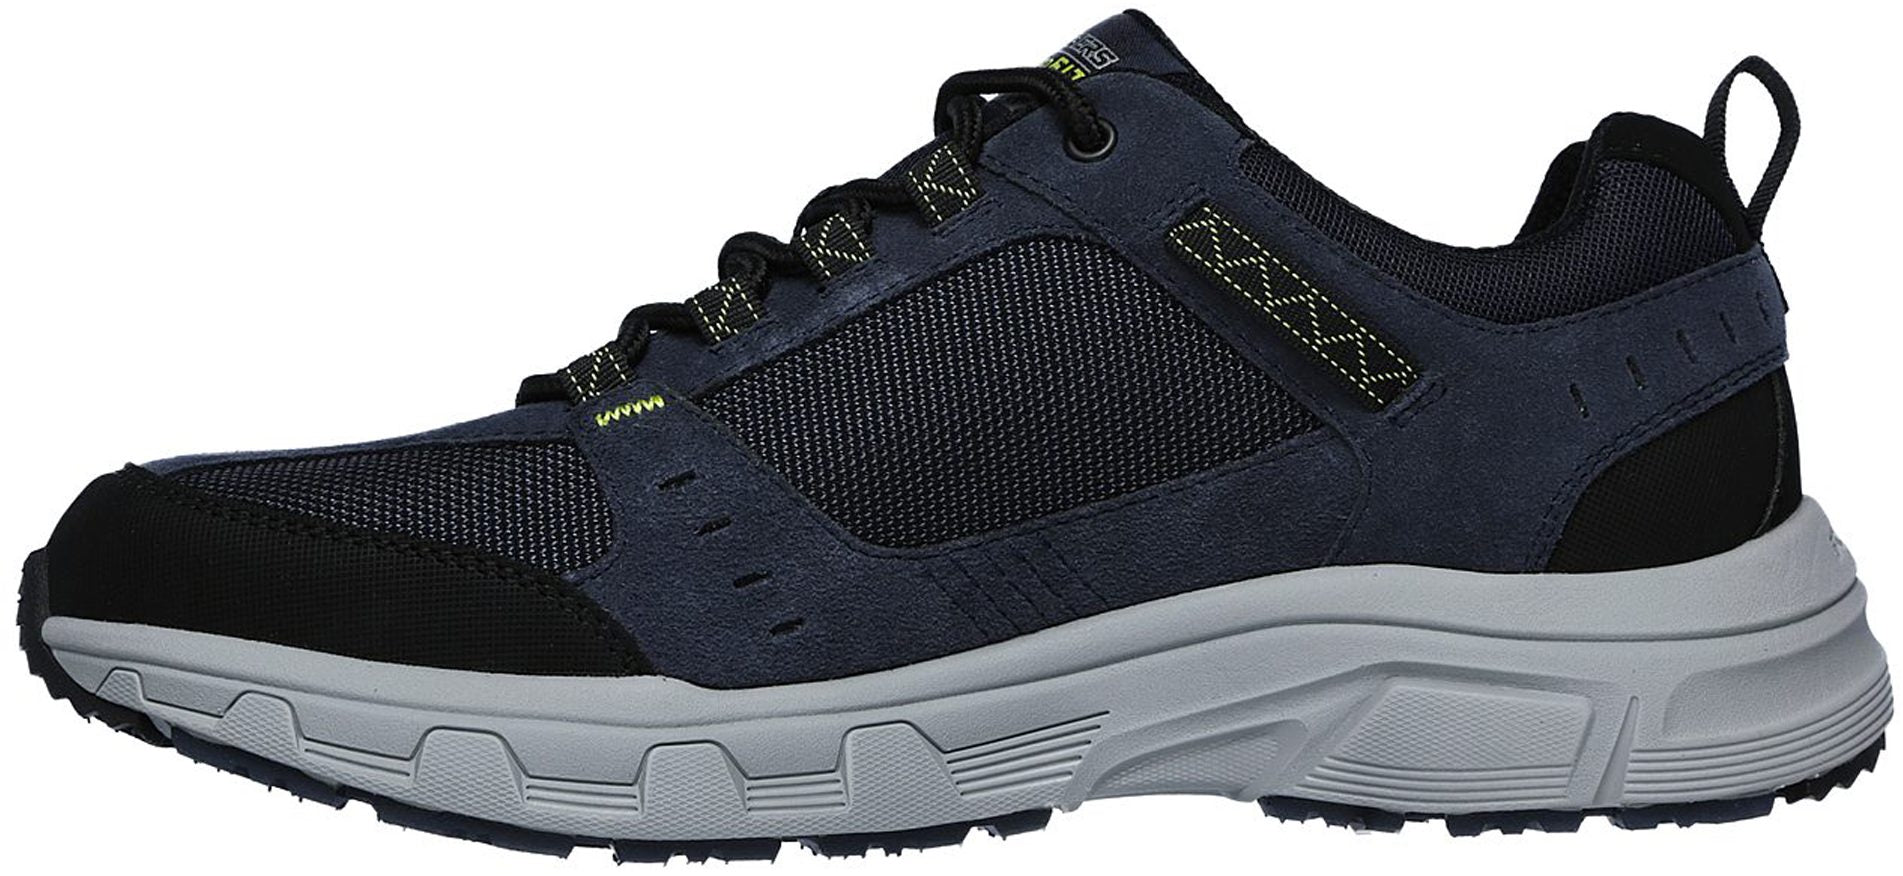 Detailed view of the tough synthetic overlays and cooling mesh panels on SKECHERS sneakers.